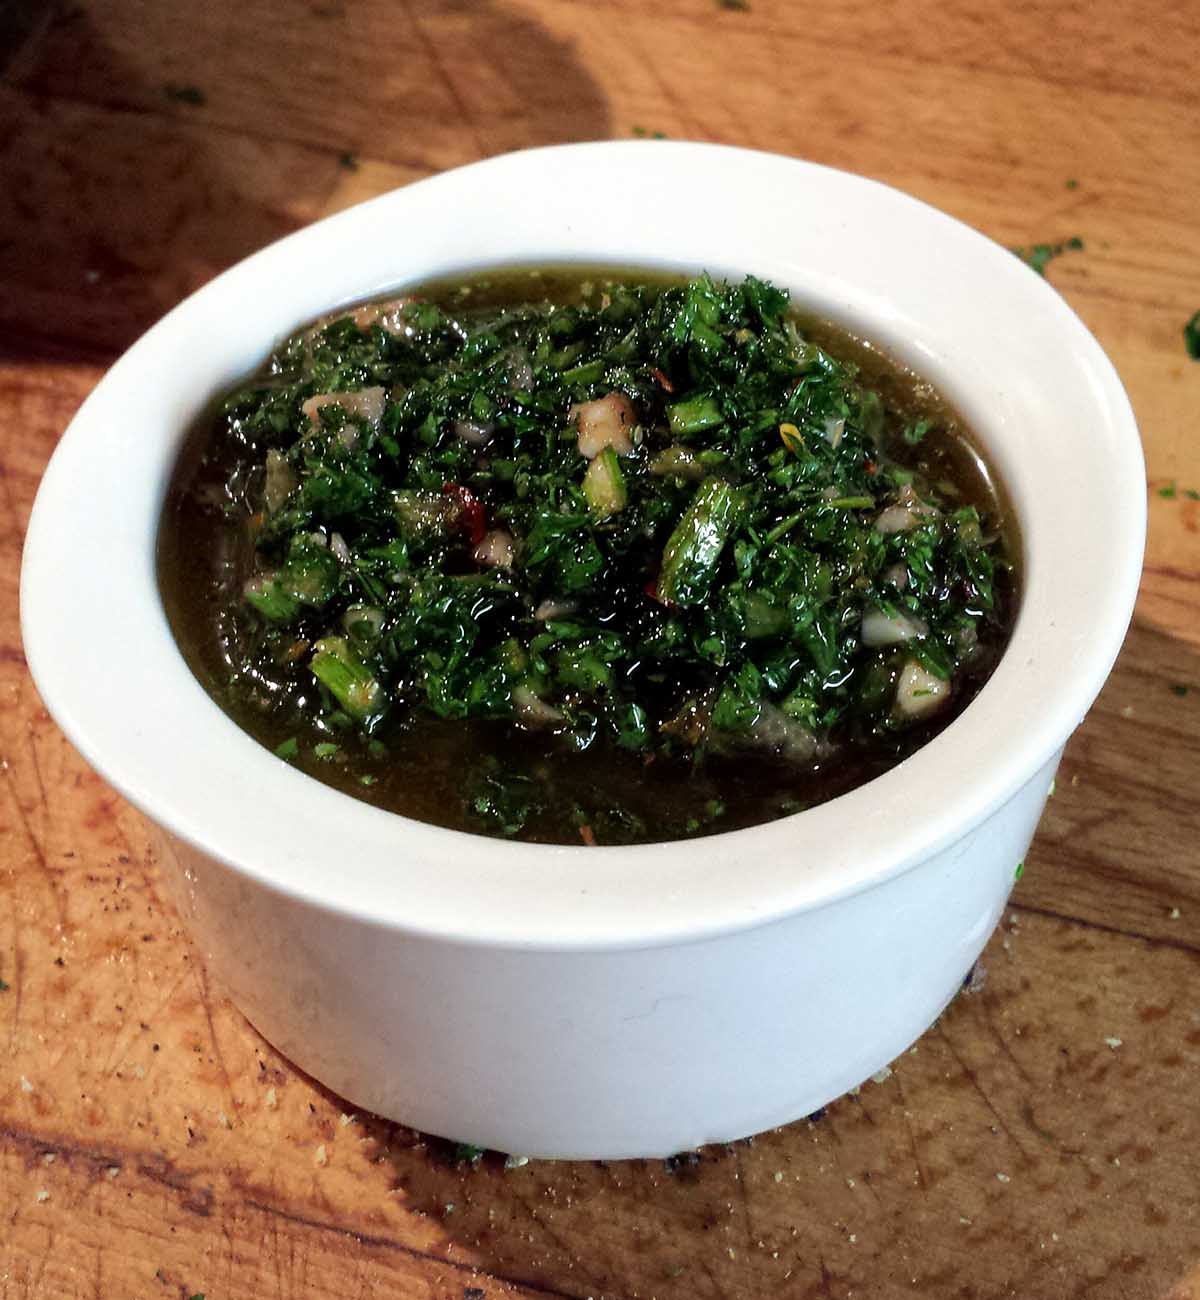 Green chimichurri sauce in a white bowl on a wood table.